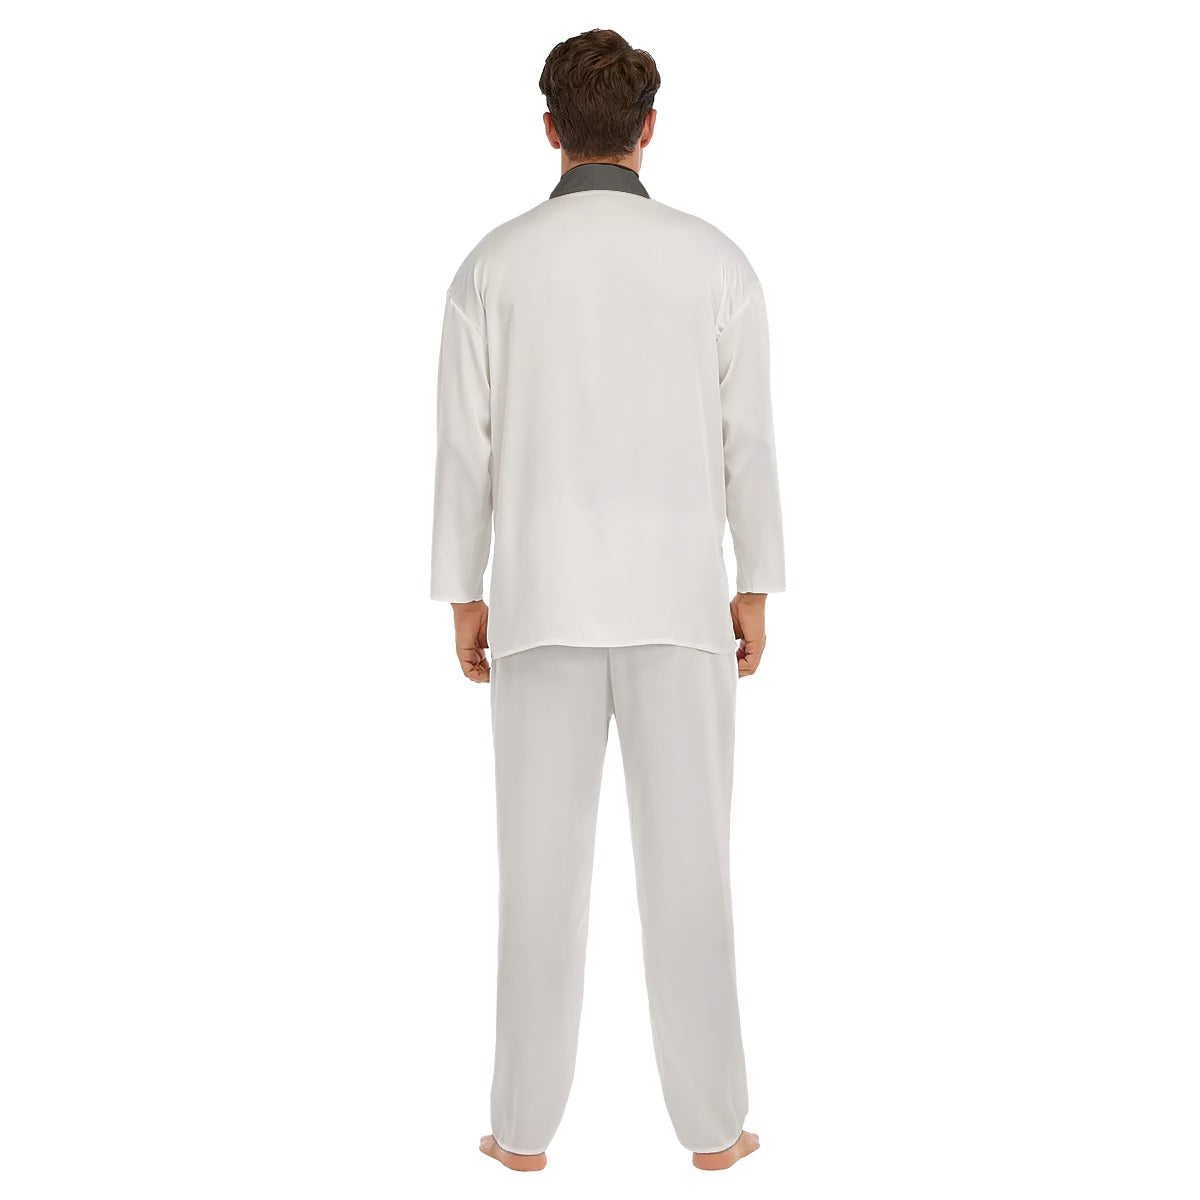 Meditation Clothes - Men's Silk Meditation Sets (Robe and Pants) - Personal Hour for Yoga and Meditations 